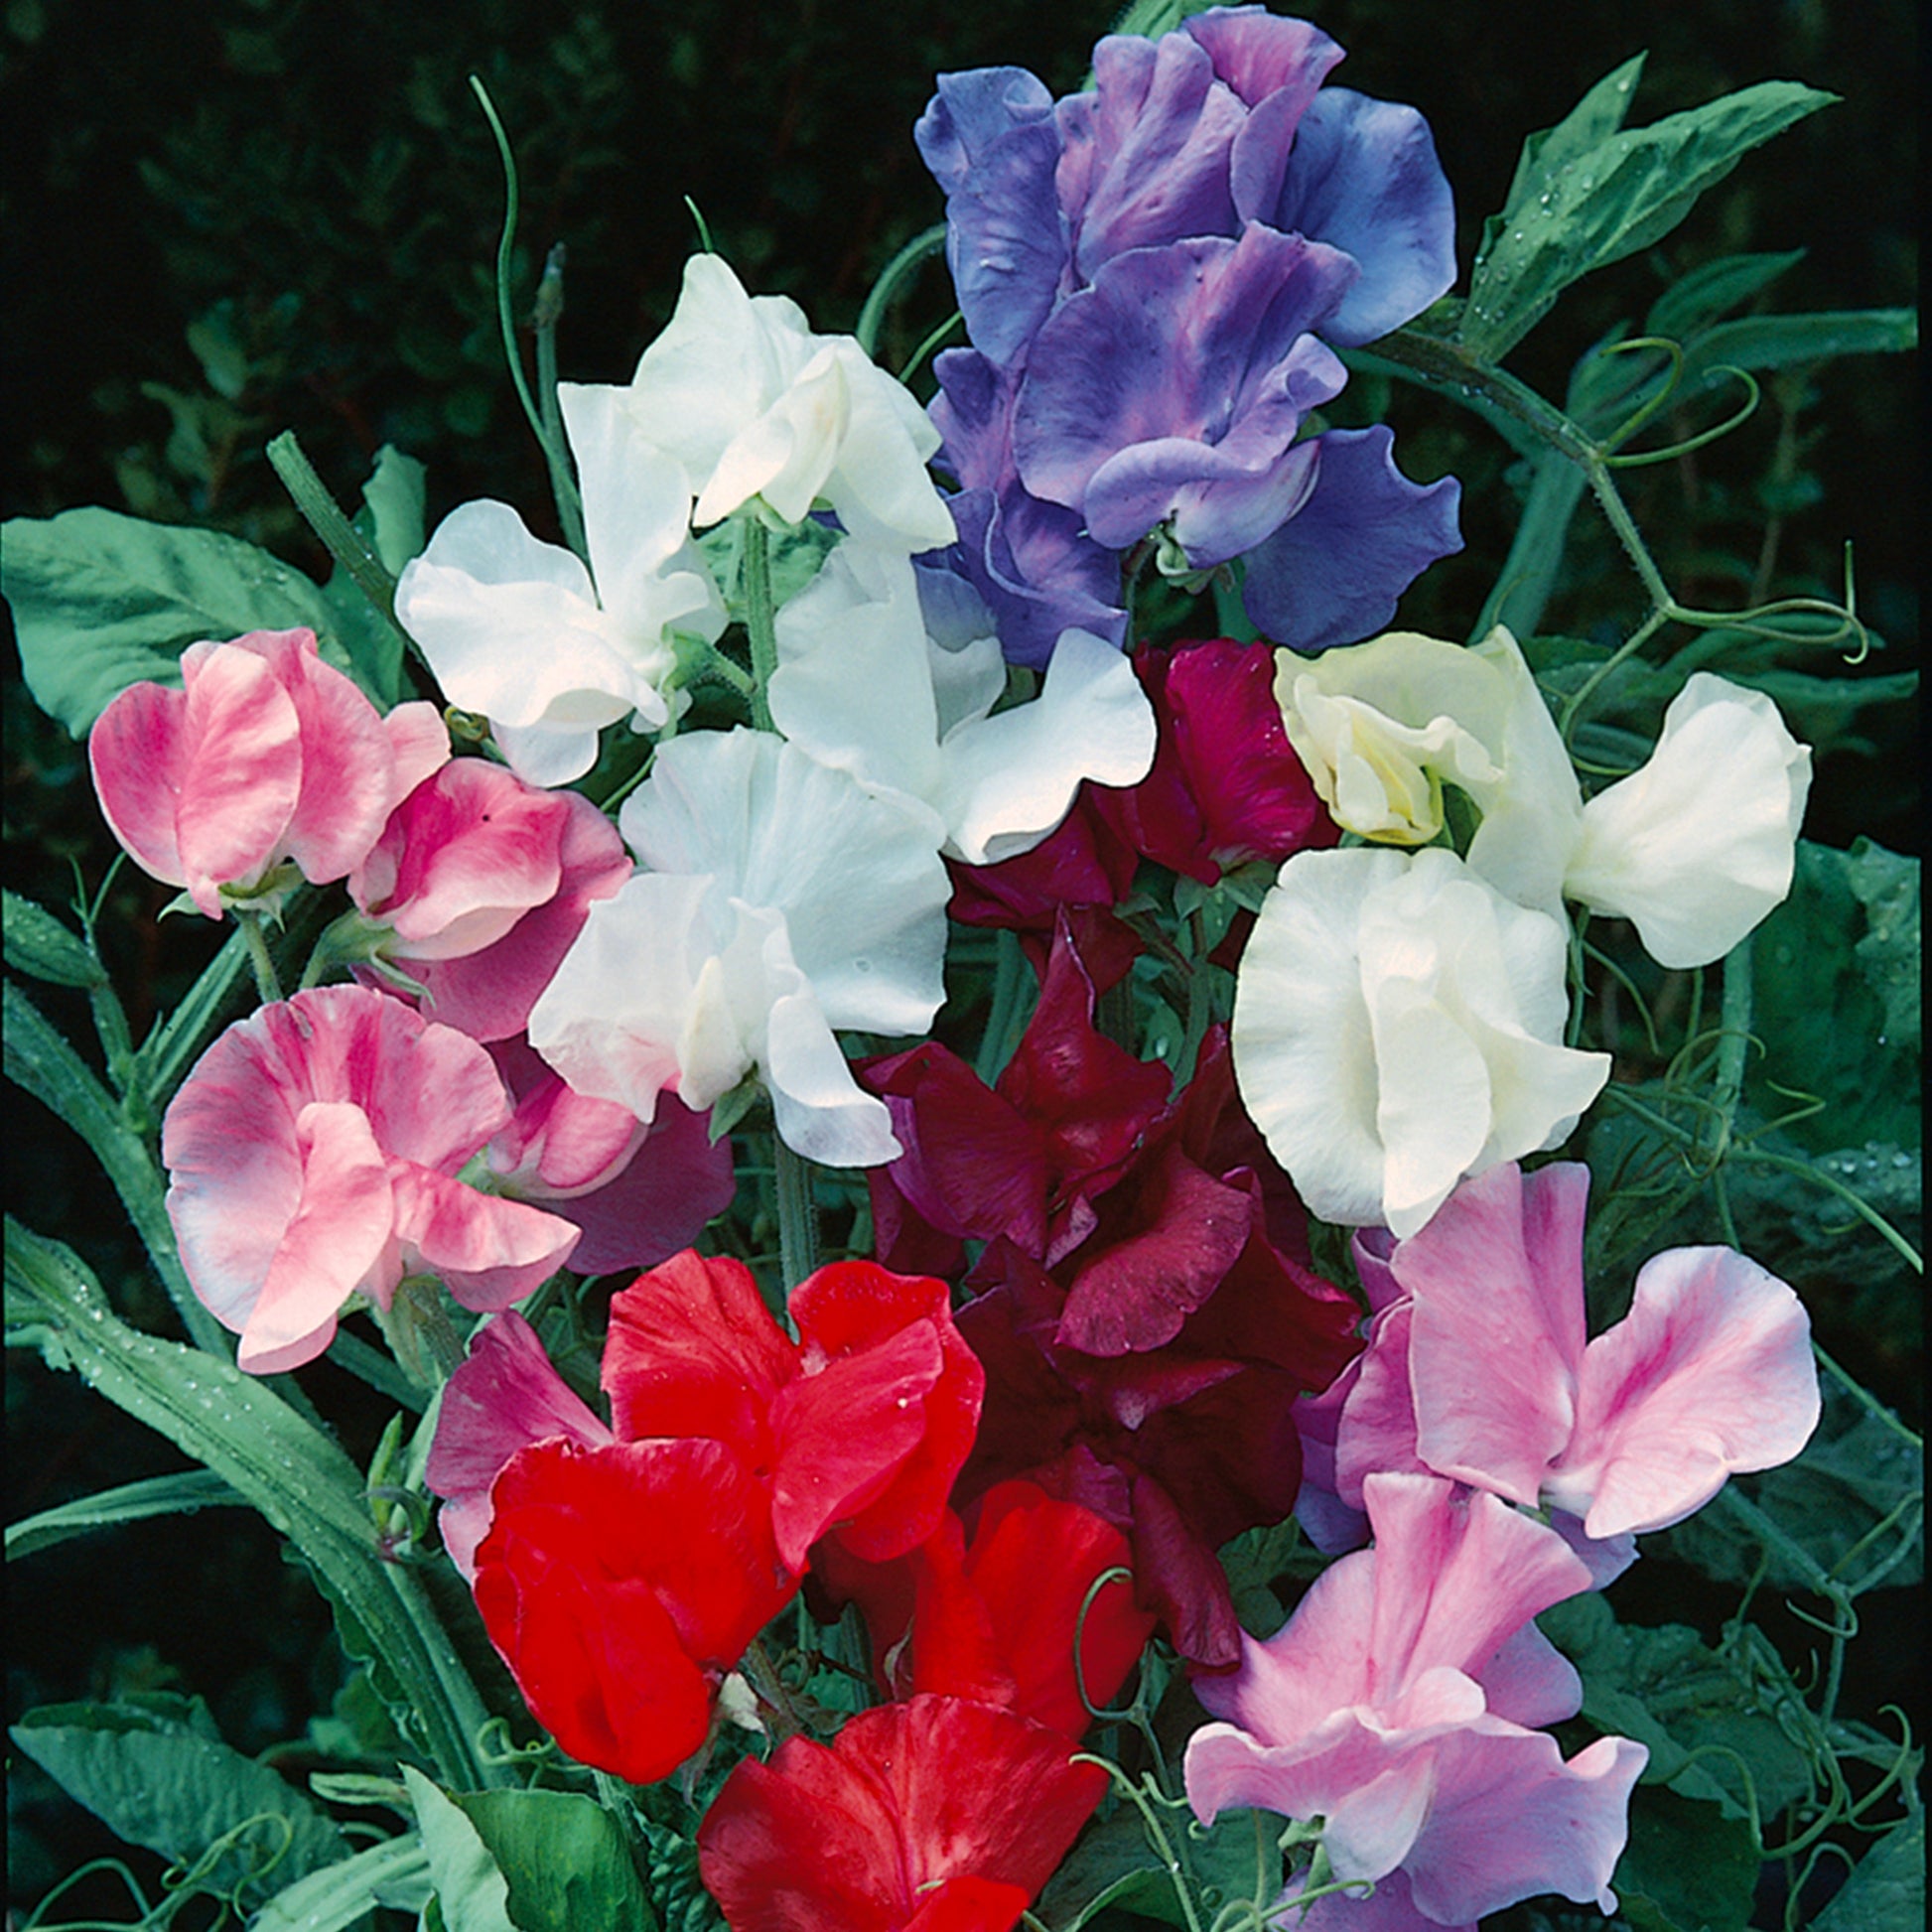 Mixed Colors Jet Set Sweet Pea flower seeds_picture displays fully grown and blooming mixed colors sweet peas, blooms include blue, pink, red and white shades.